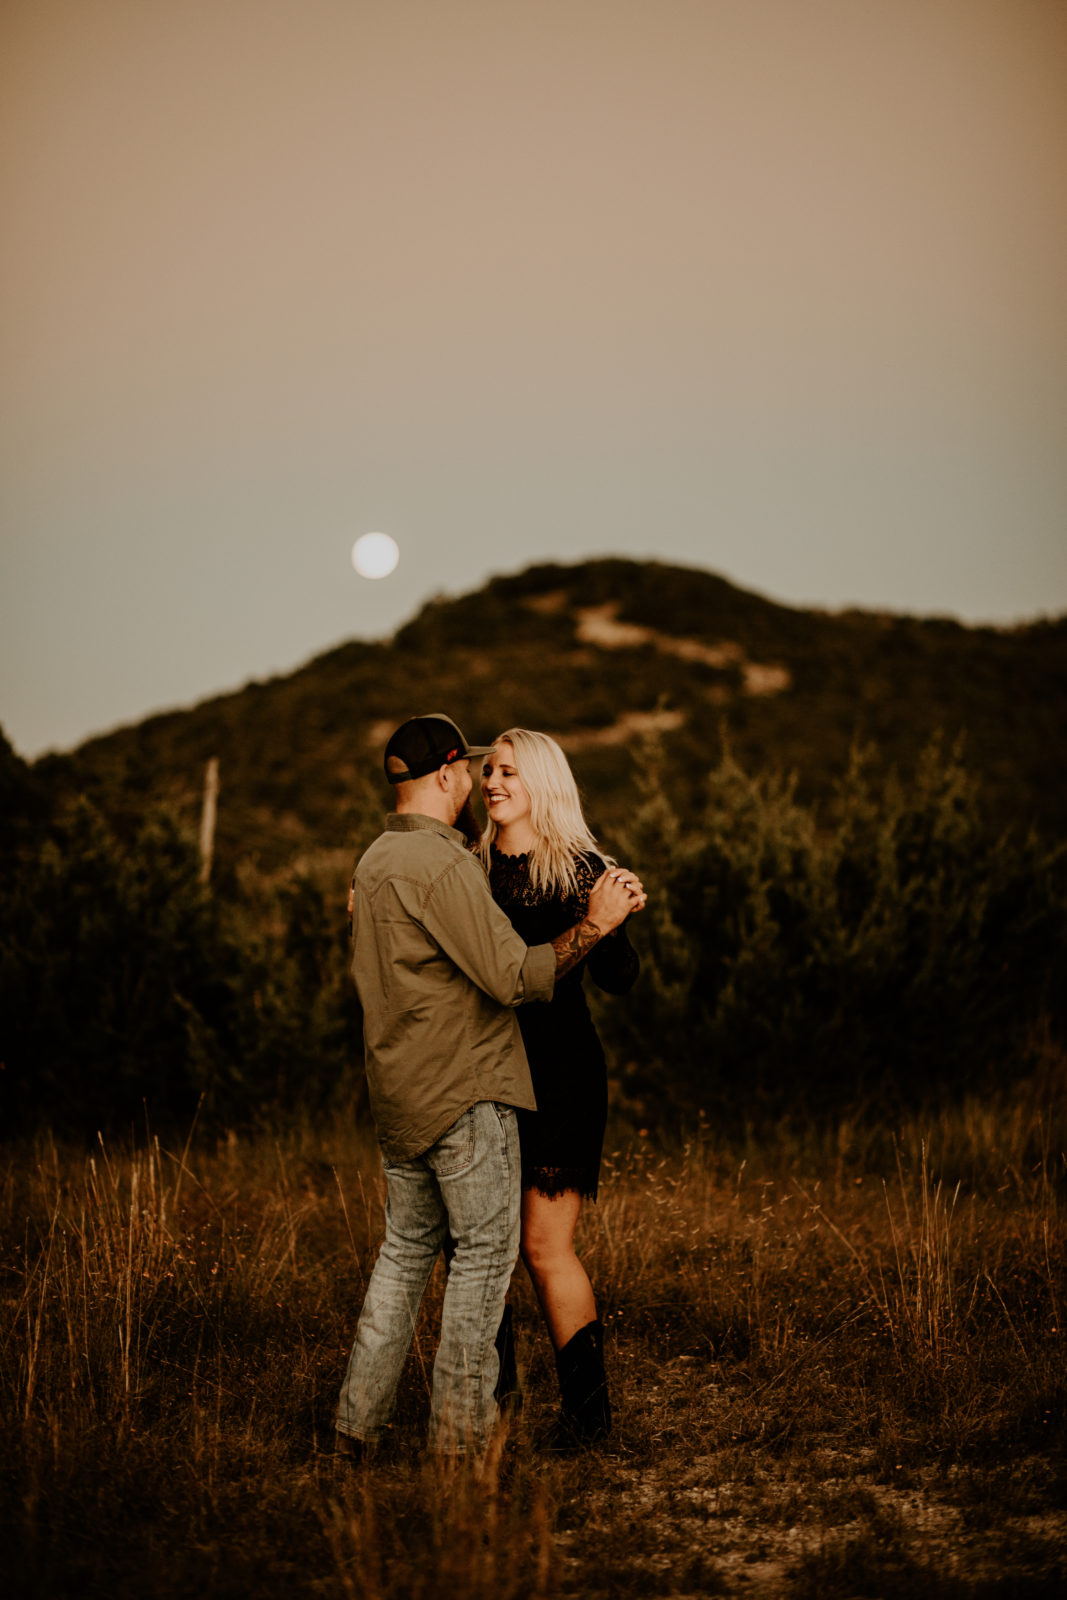 engagement session photos after sunset in front of Texas hill in the desert